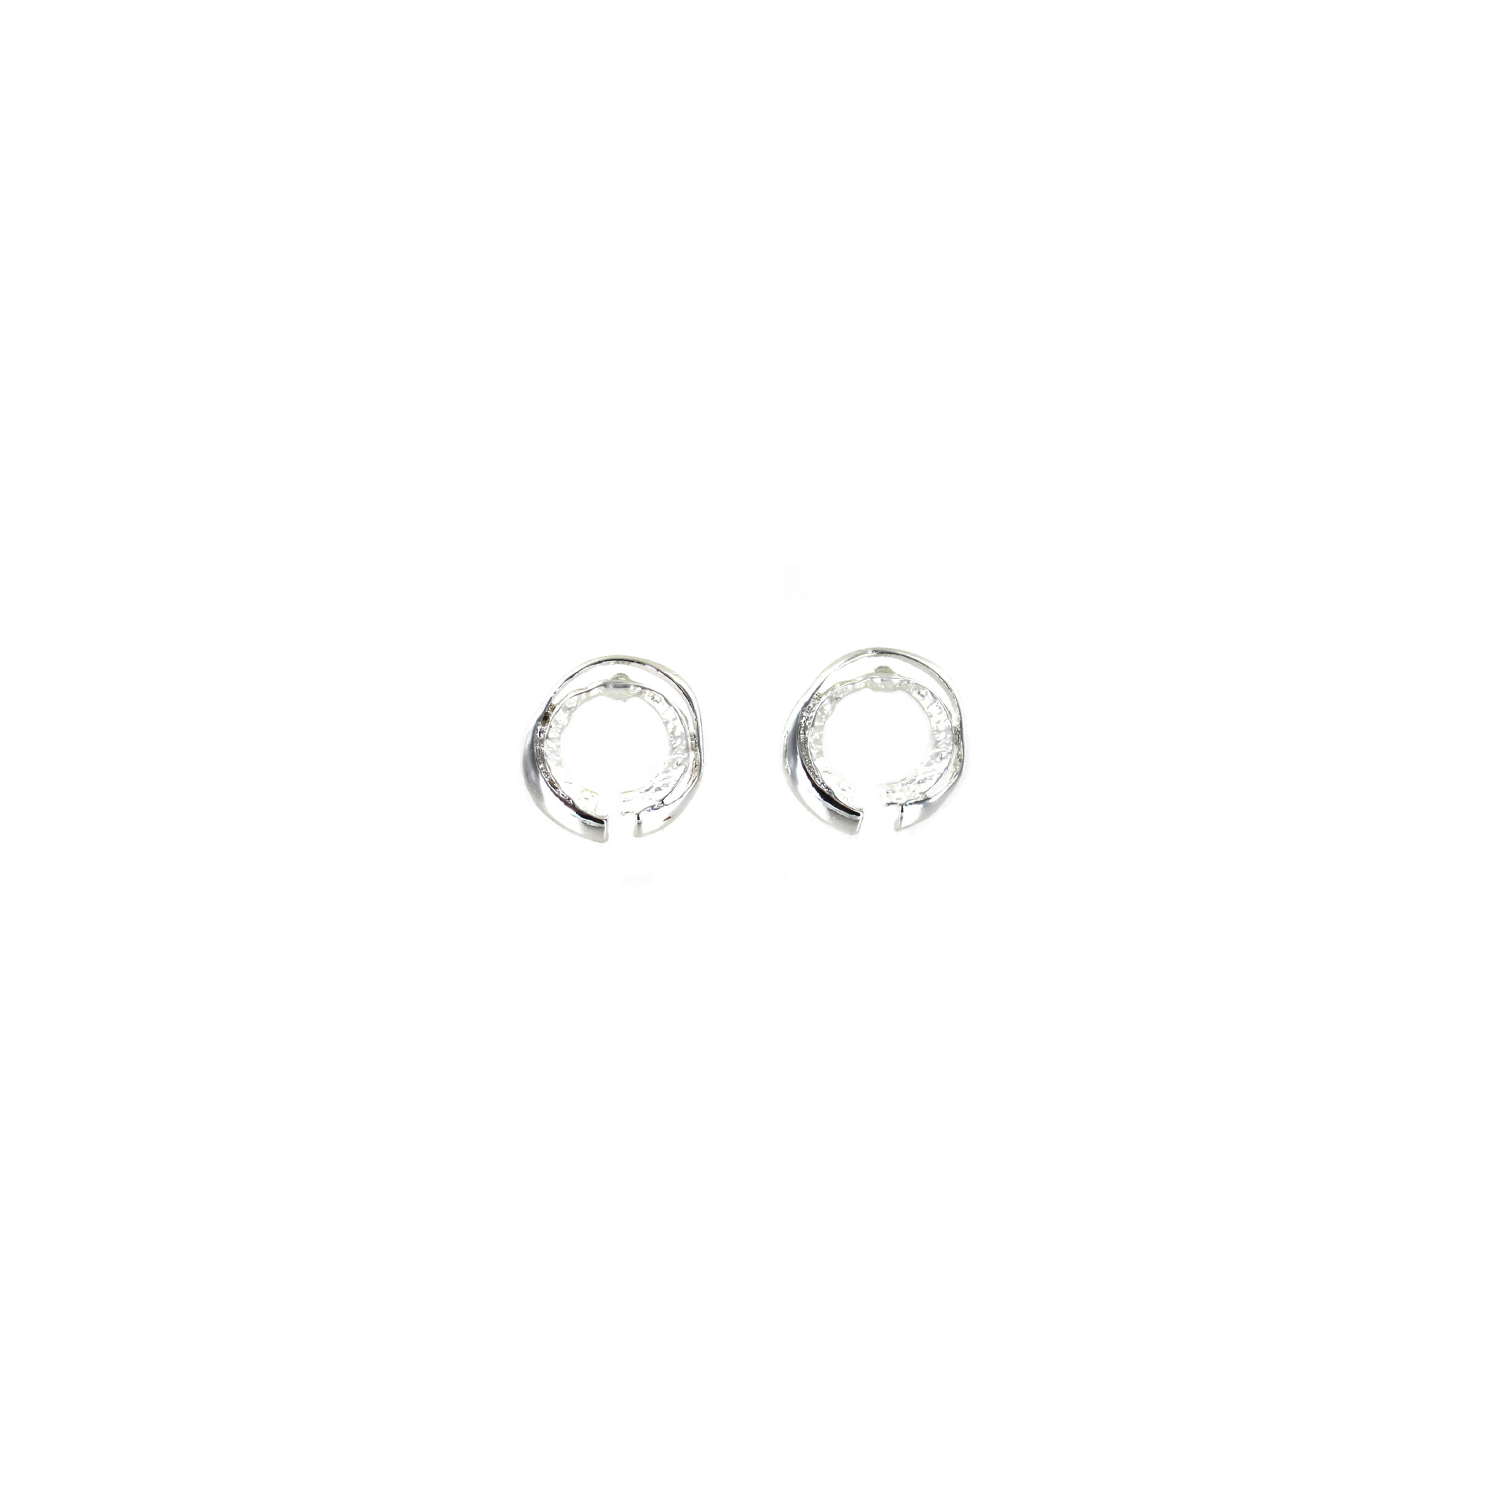 Silver tone earrings. (Matching Necklace N10713.)